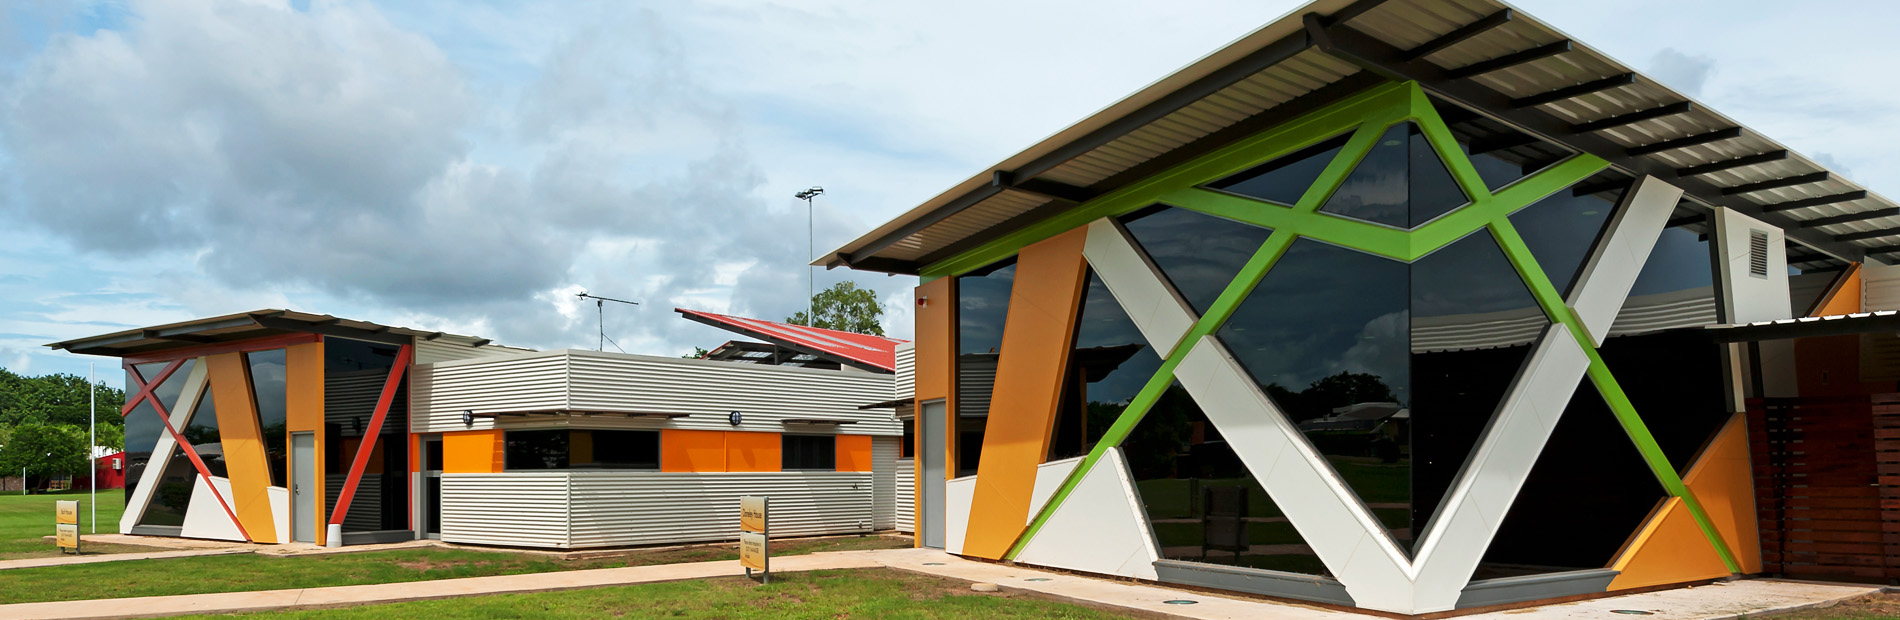 St Johns College Boarding Facility Design by Hodgkison Darwin Architects